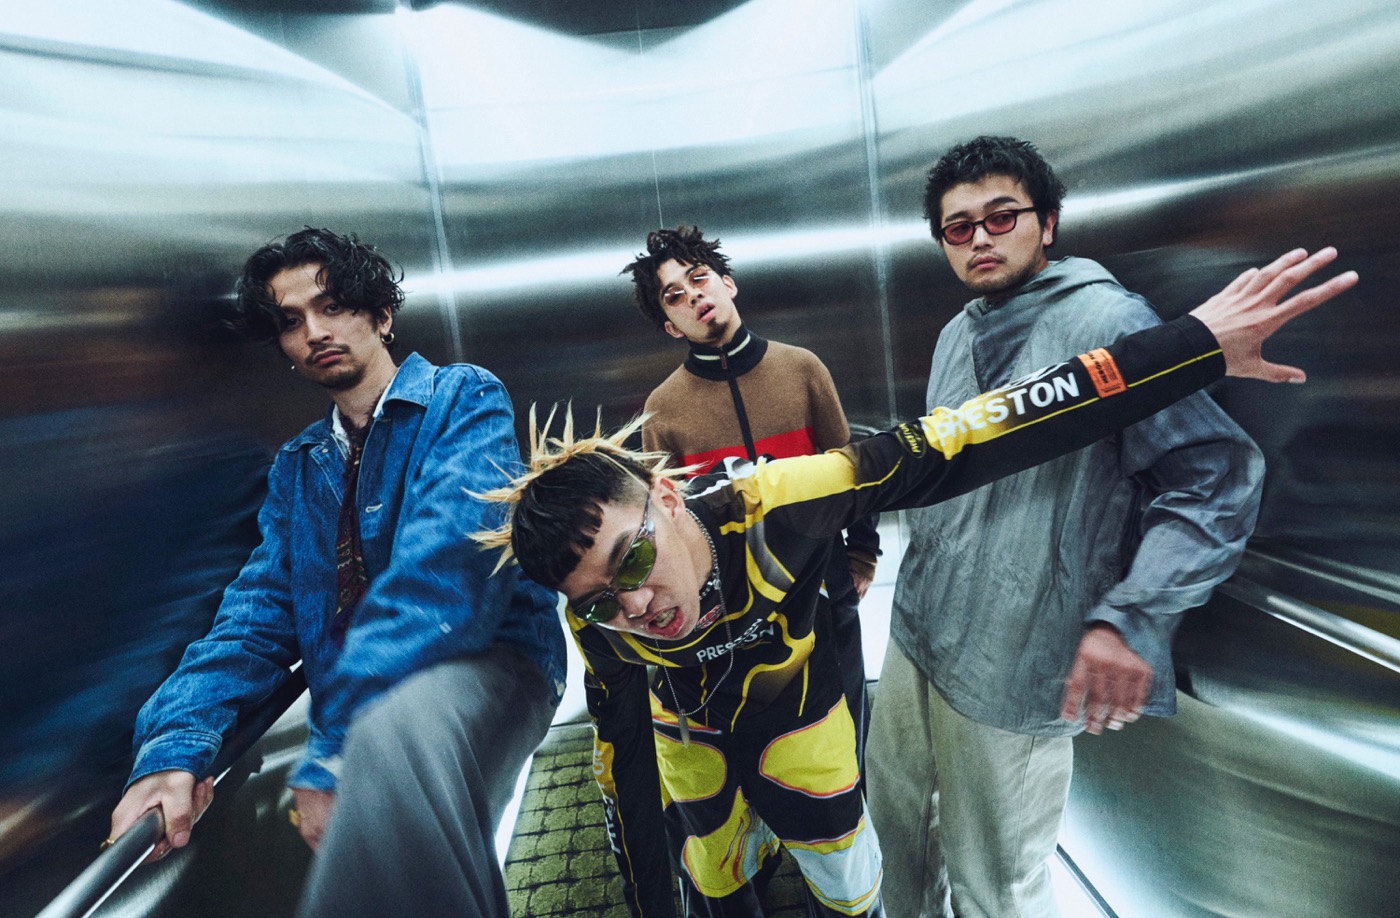 『King Gnu Asia Tour「THE GREATEST UNKNOWN」』ソウル追加公演が決定 - 画像一覧（1/2）